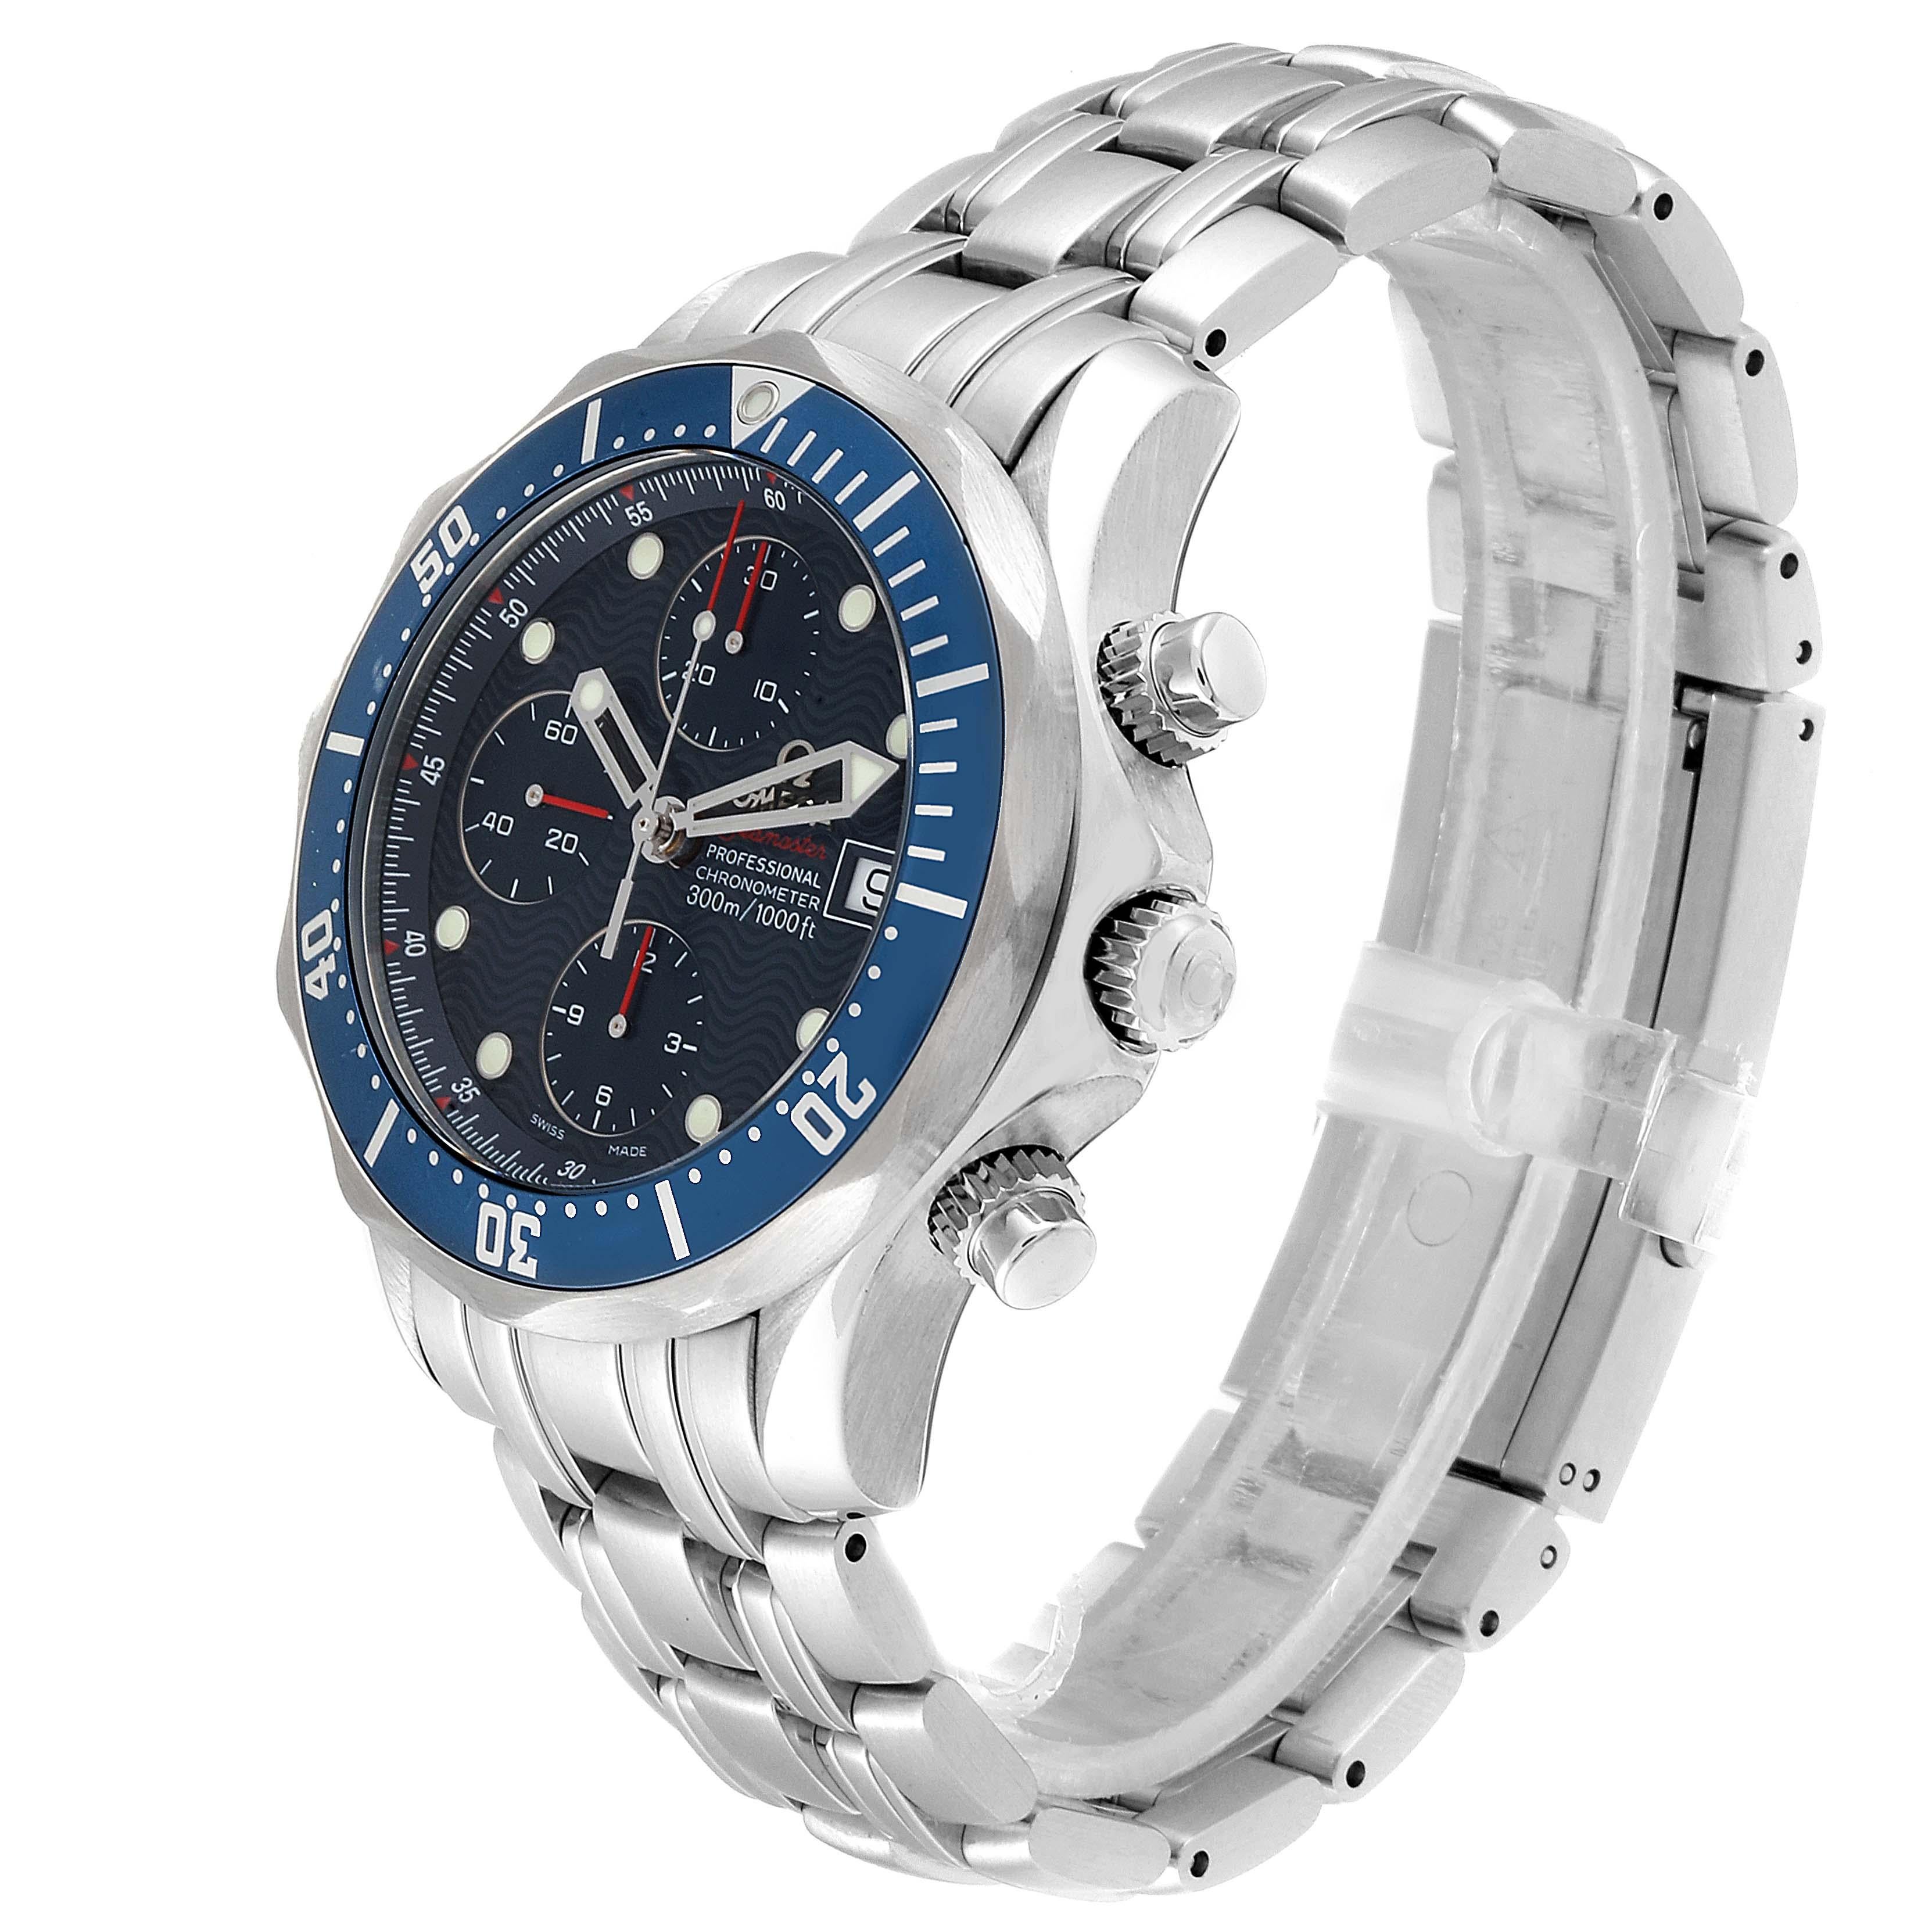 Omega Seamaster 300 Chronograph Men's Watch 2225.80.00 Box Card For Sale 1